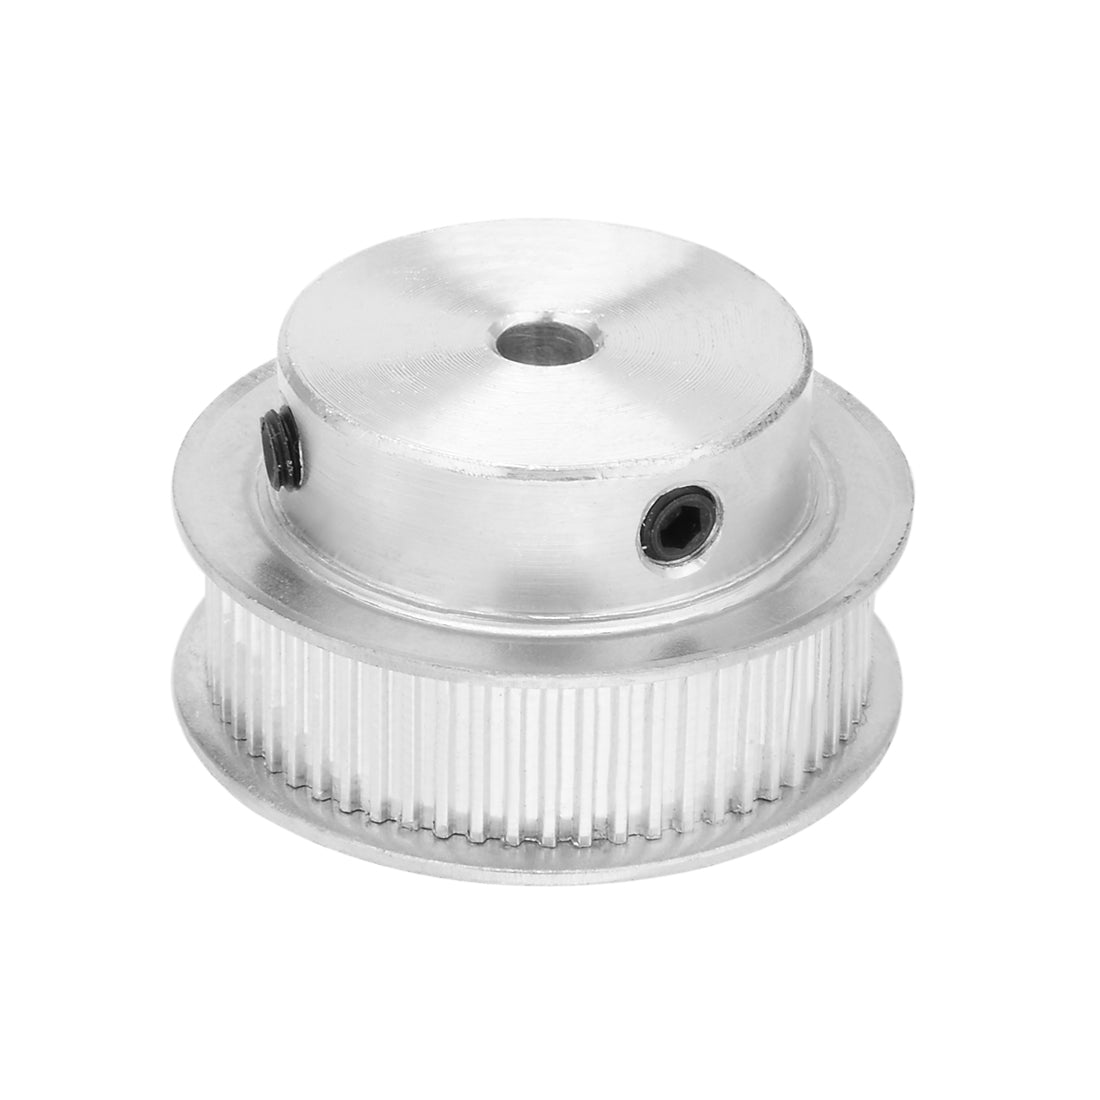 uxcell Uxcell Aluminum M-X-L 60 Teeth 6mm Bore Timing Belt Idler Pulley Synchronous Wheel 10mm Belt for 3D Printer CNC